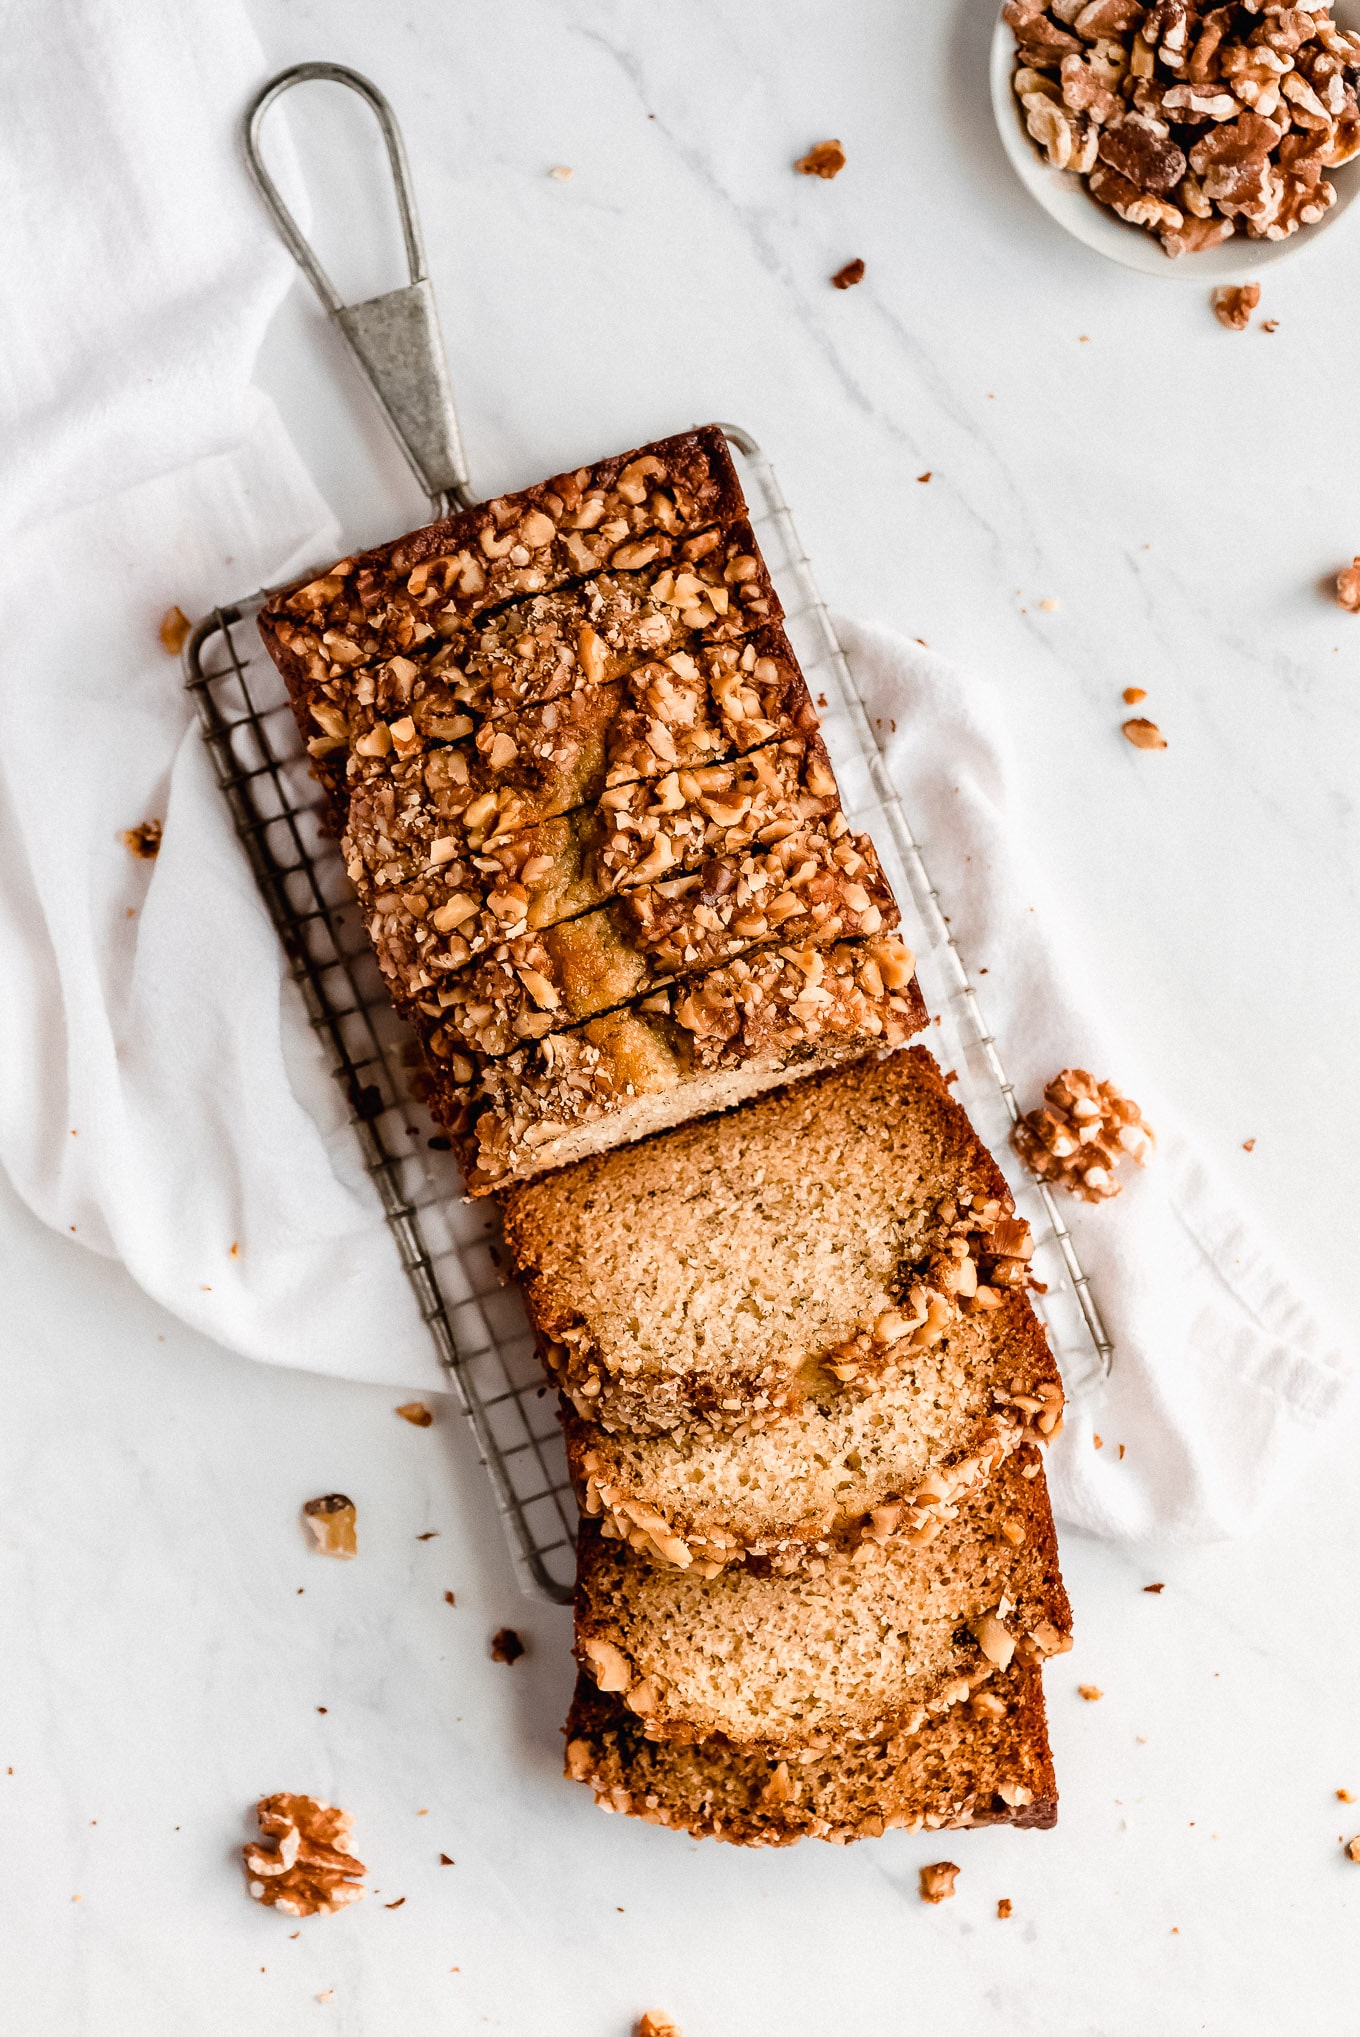 Banana Nut Bread sliced on a cooling rack with walnuts scattered around on the table.